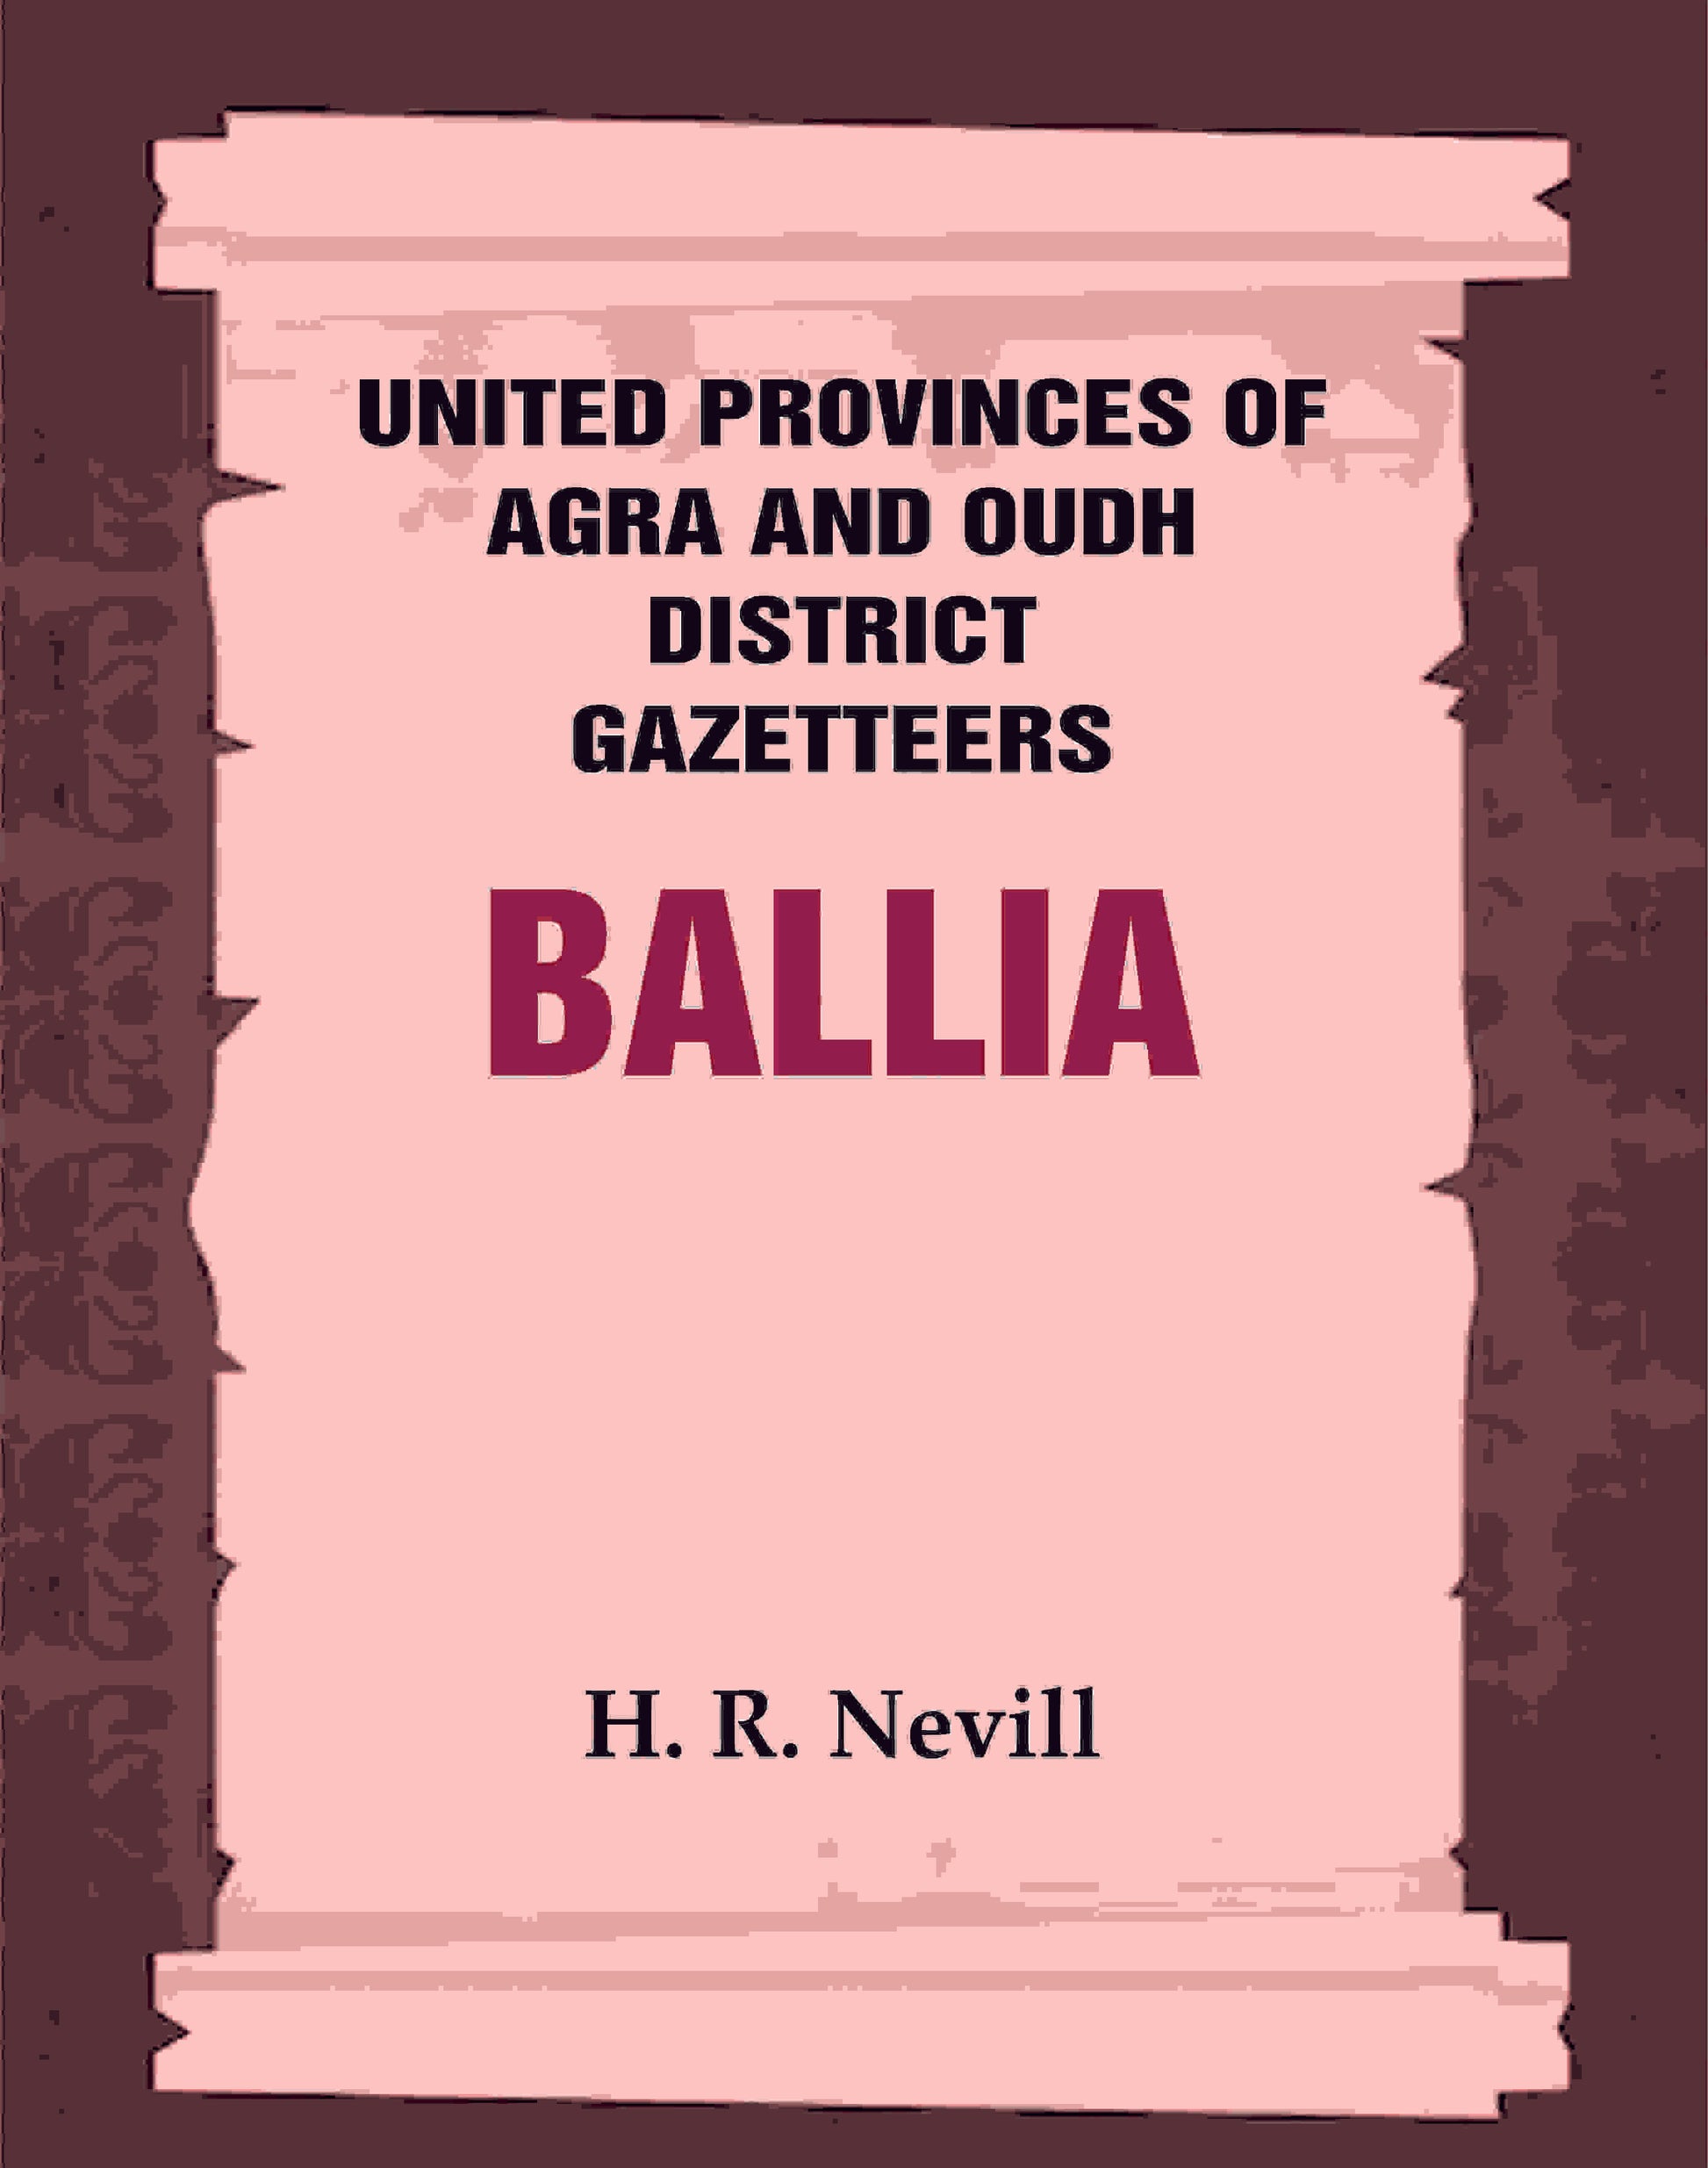 United Provinces of Agra and Oudh District Gazetteers: Ballia